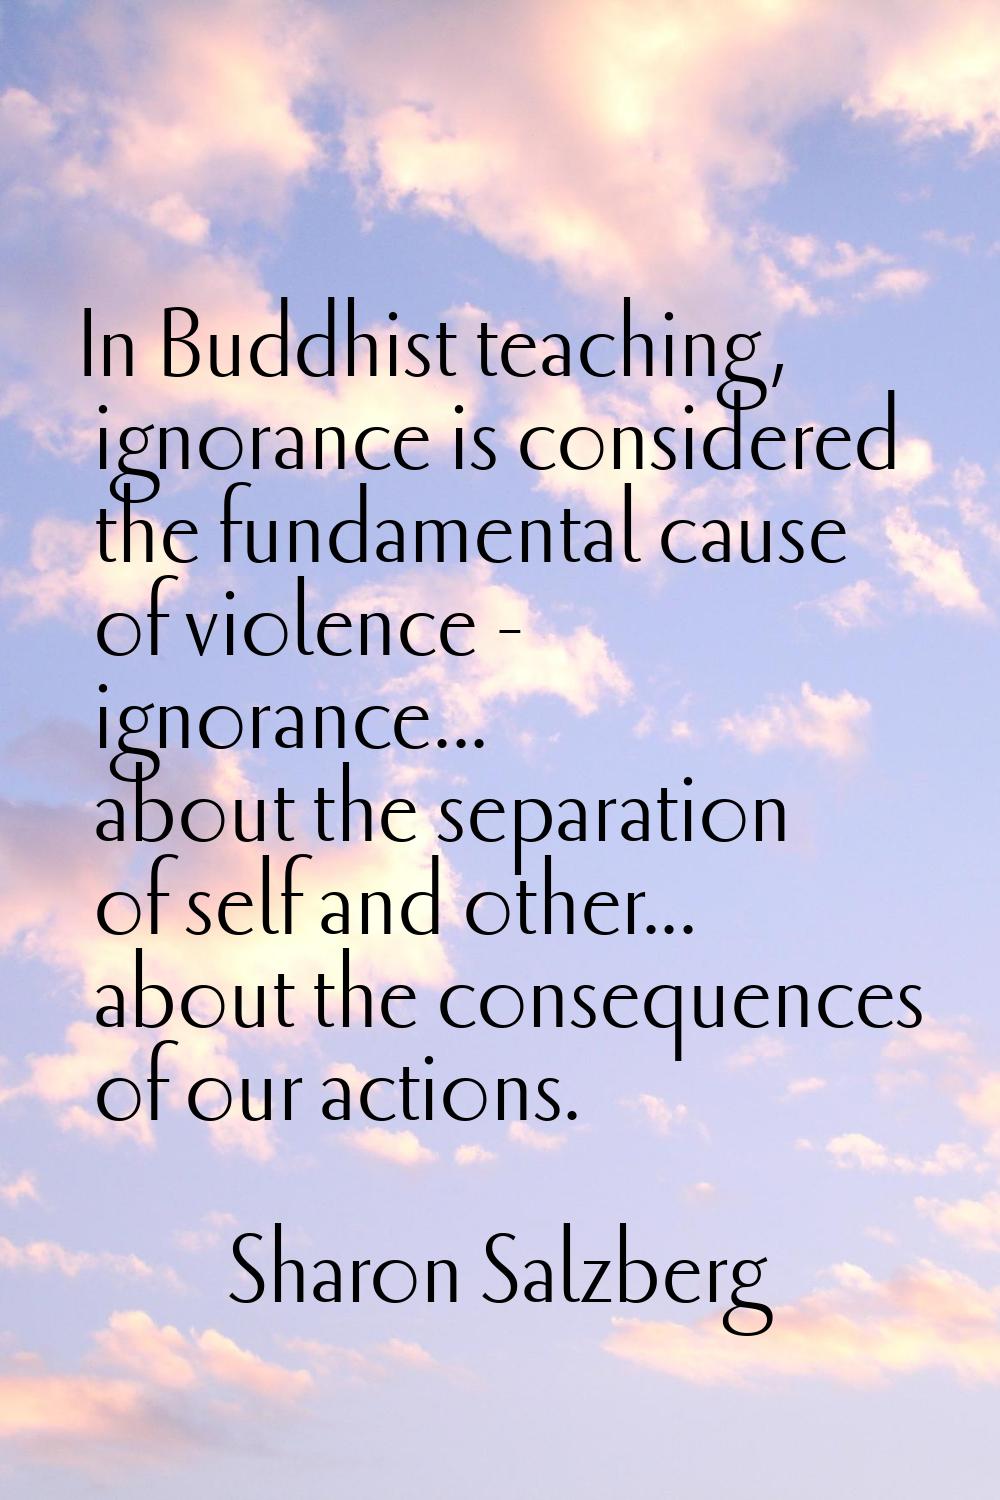 In Buddhist teaching, ignorance is considered the fundamental cause of violence - ignorance... abou